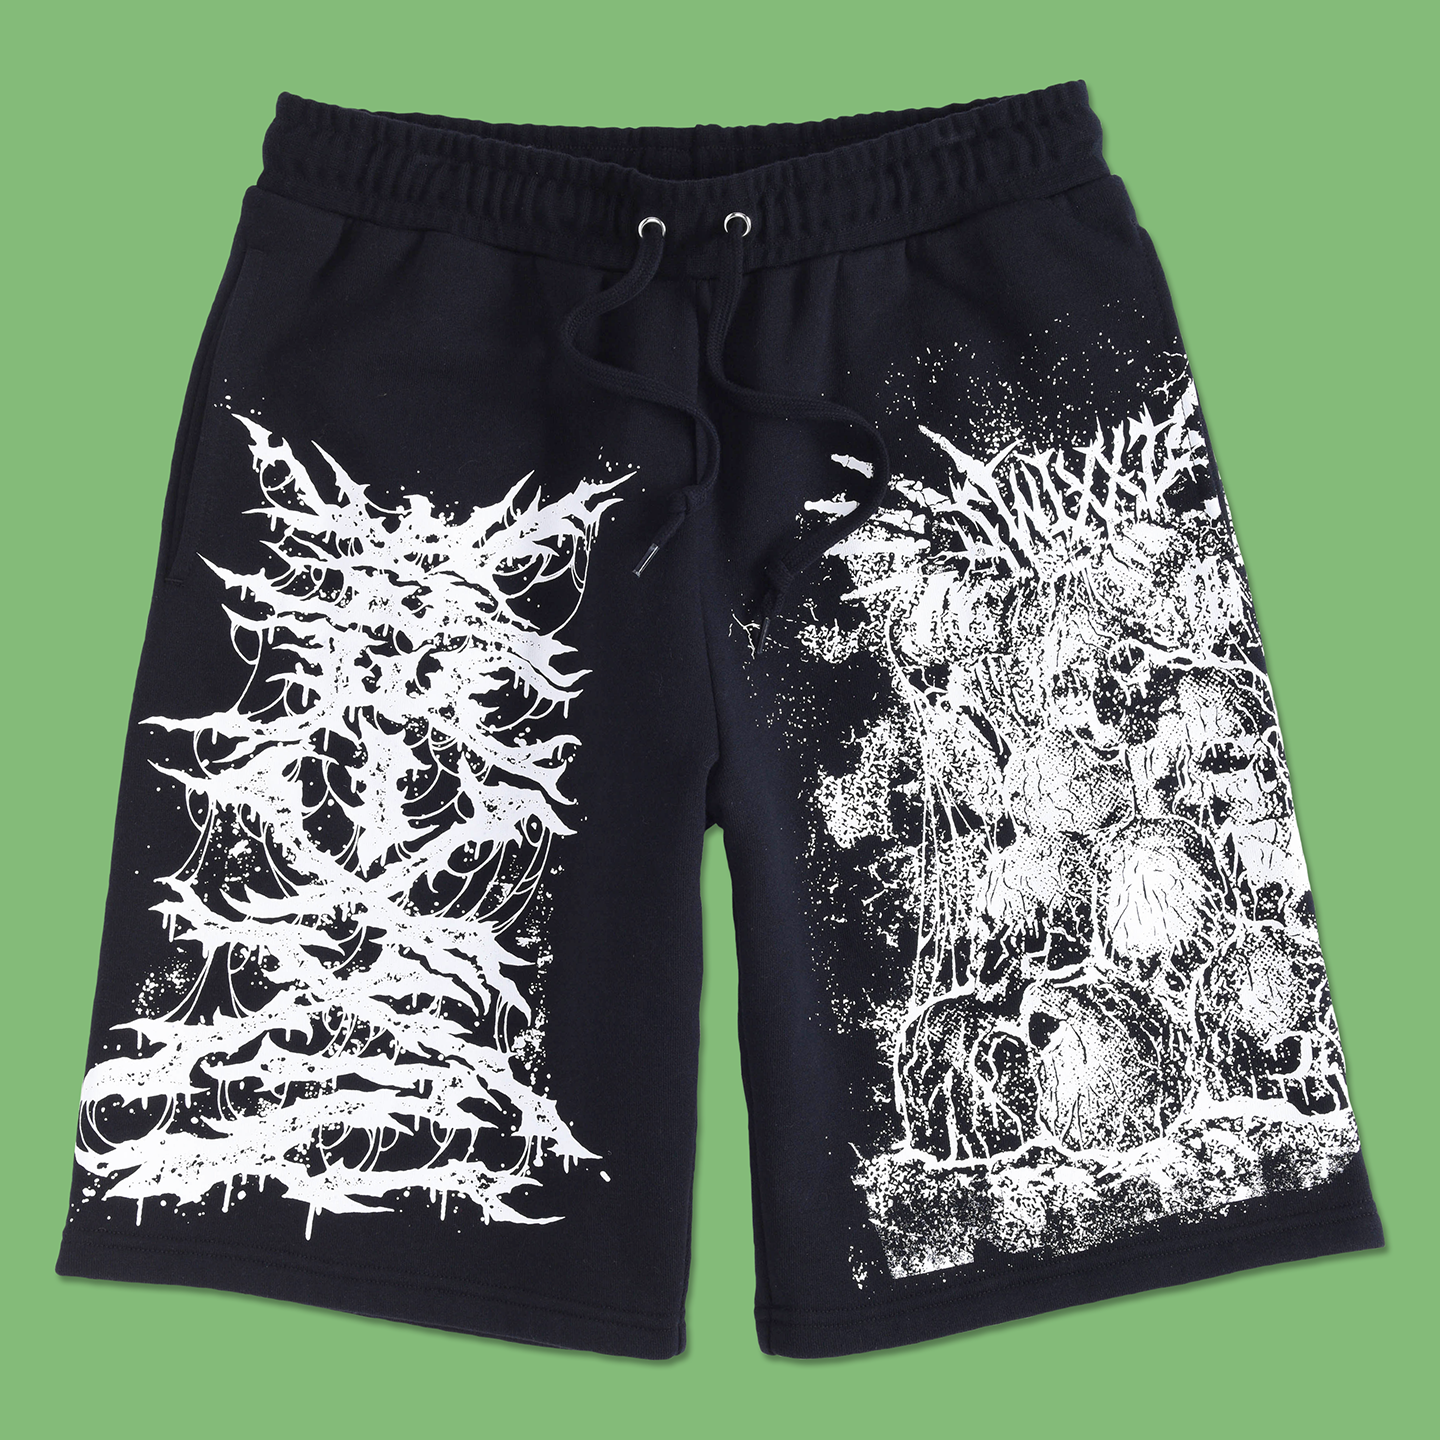 Skull Pile Sweat Shorts from SWIXXZ by Maggie Lindemann - Front